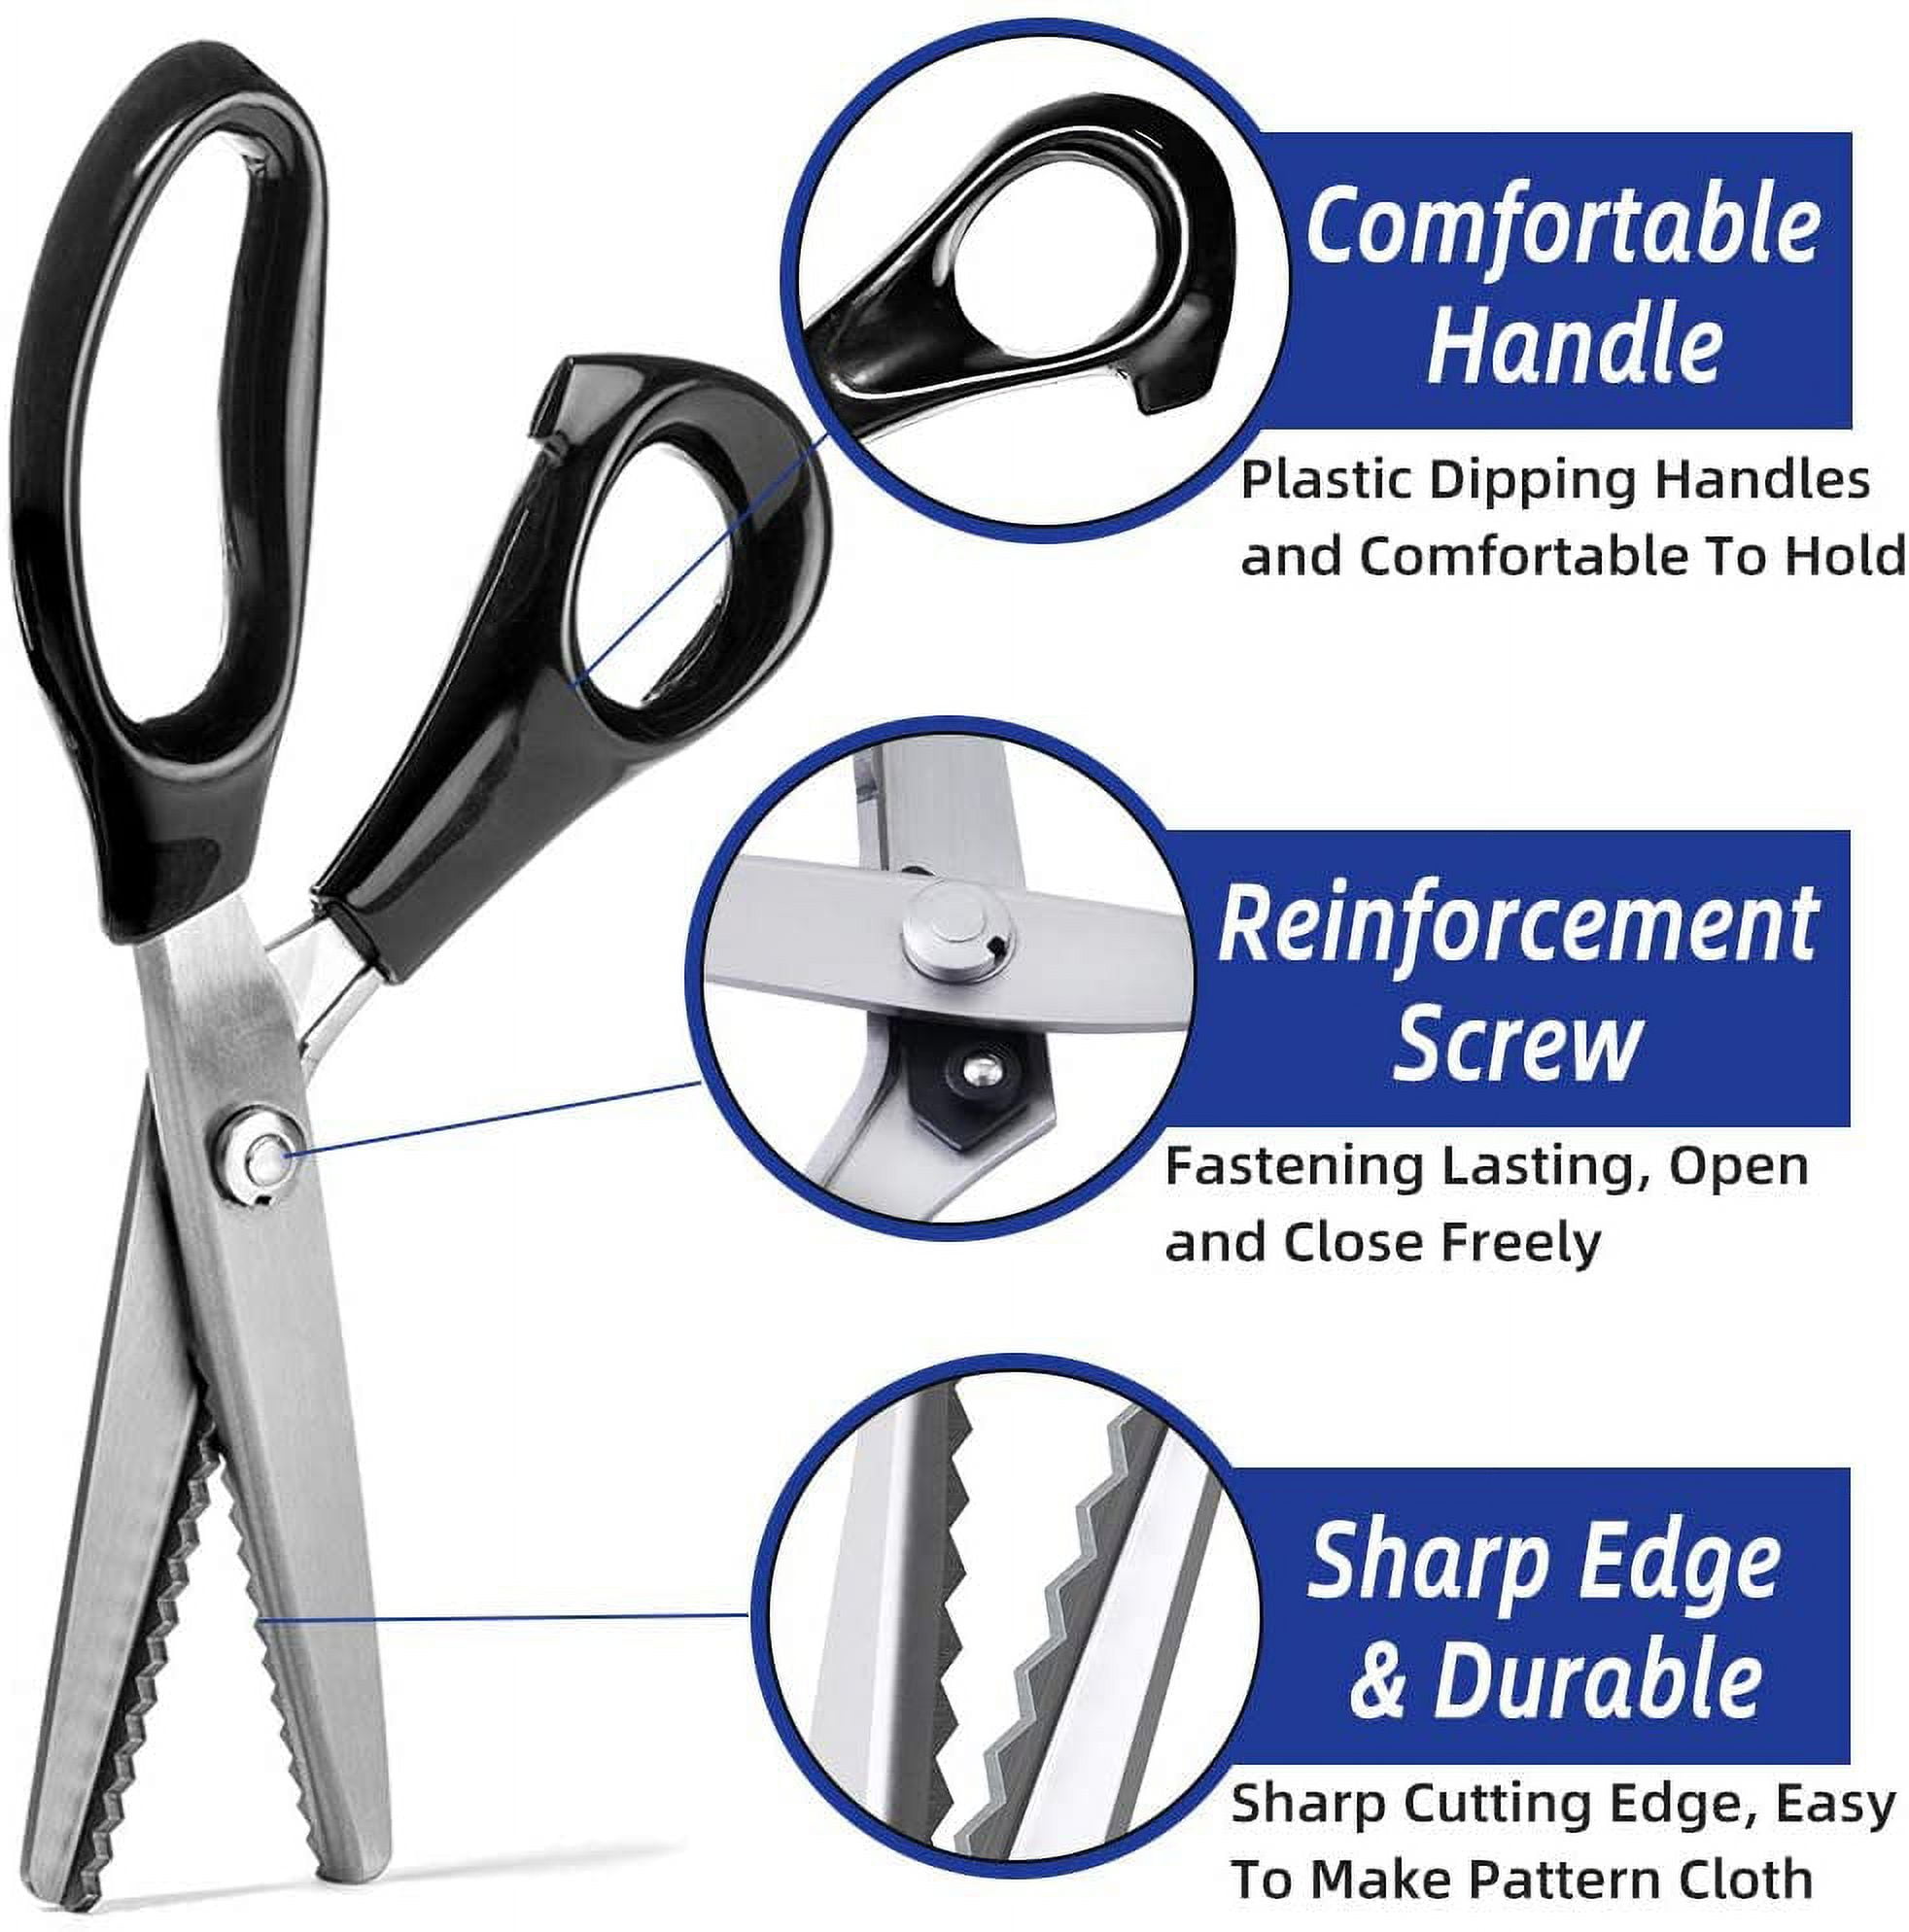 Stainless Steel Scissors for Fabric, Crafting, Sewing, Scrapbooking,  Utility, School, Home, Office Supplies, Razor Sharp Ships From the USA 